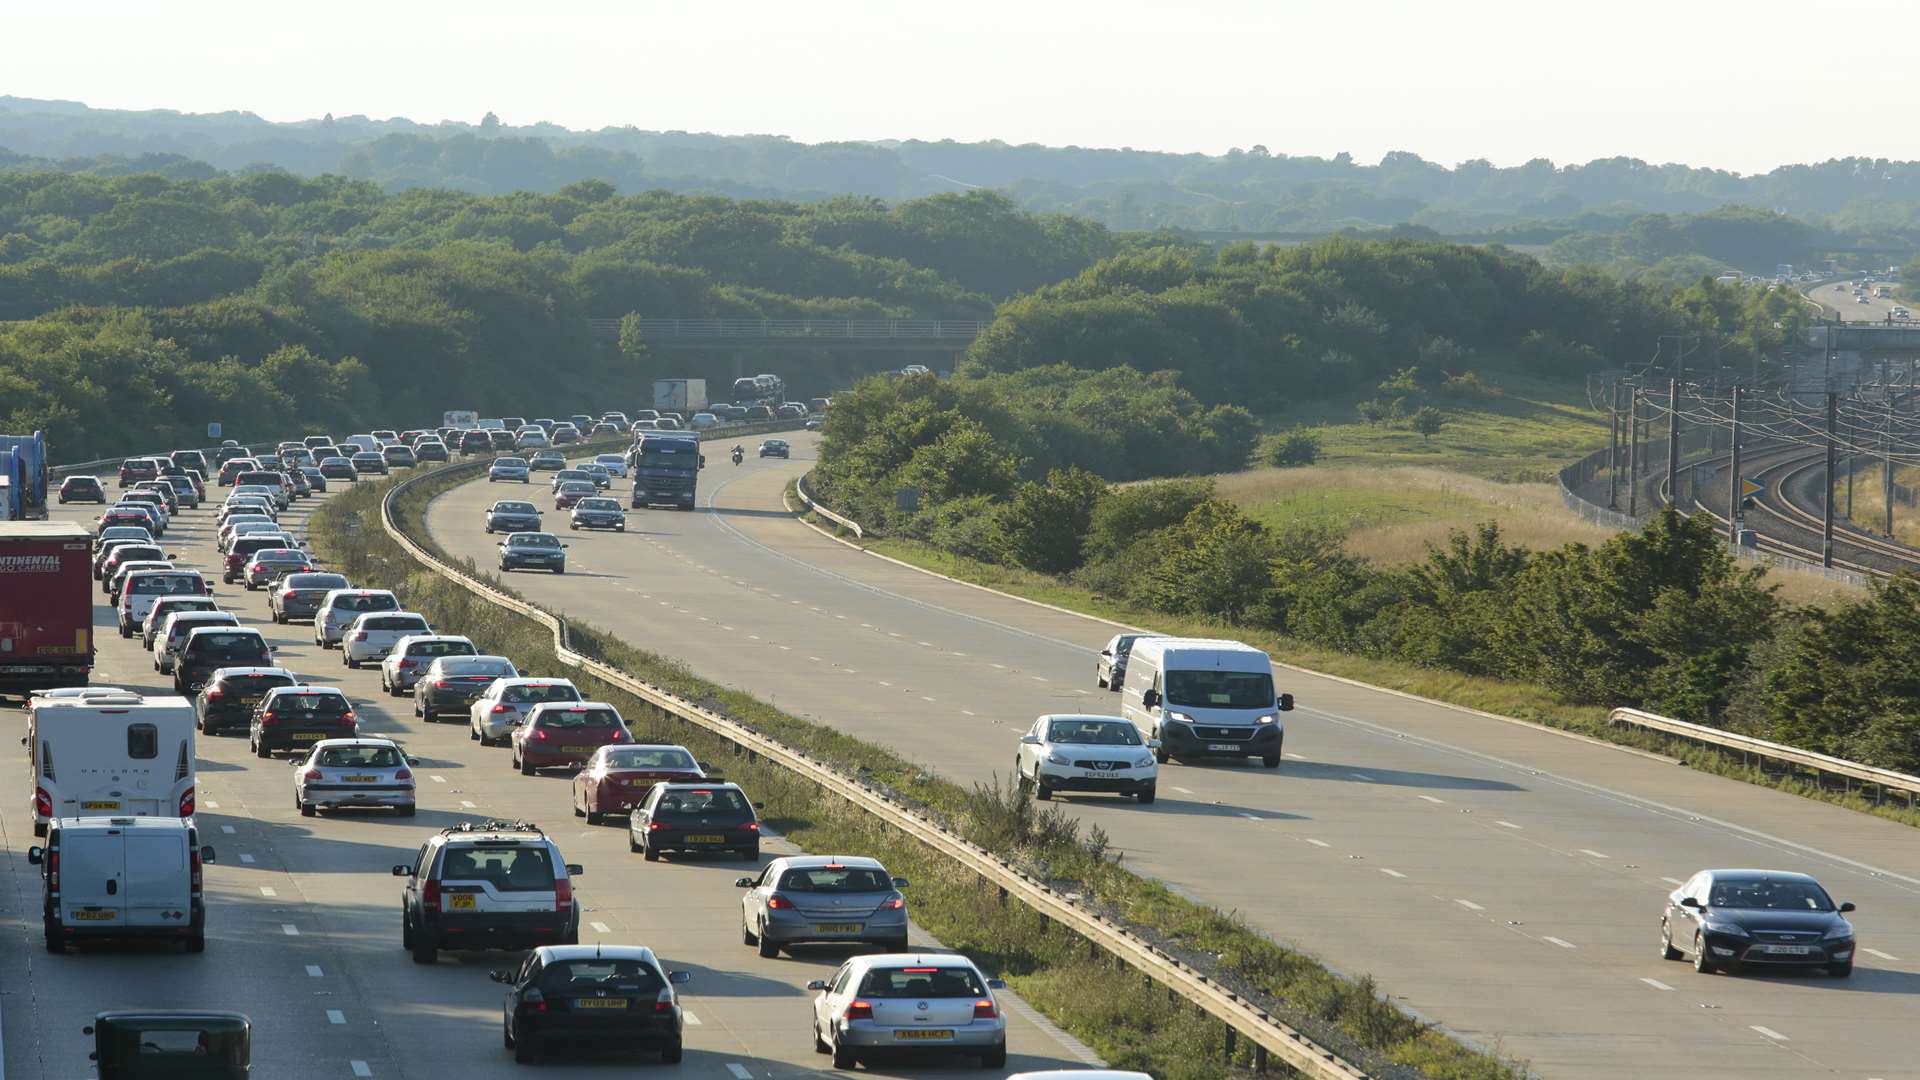 The London bound M20 between junctions 8 and 9. (File picture by Martin Apps).